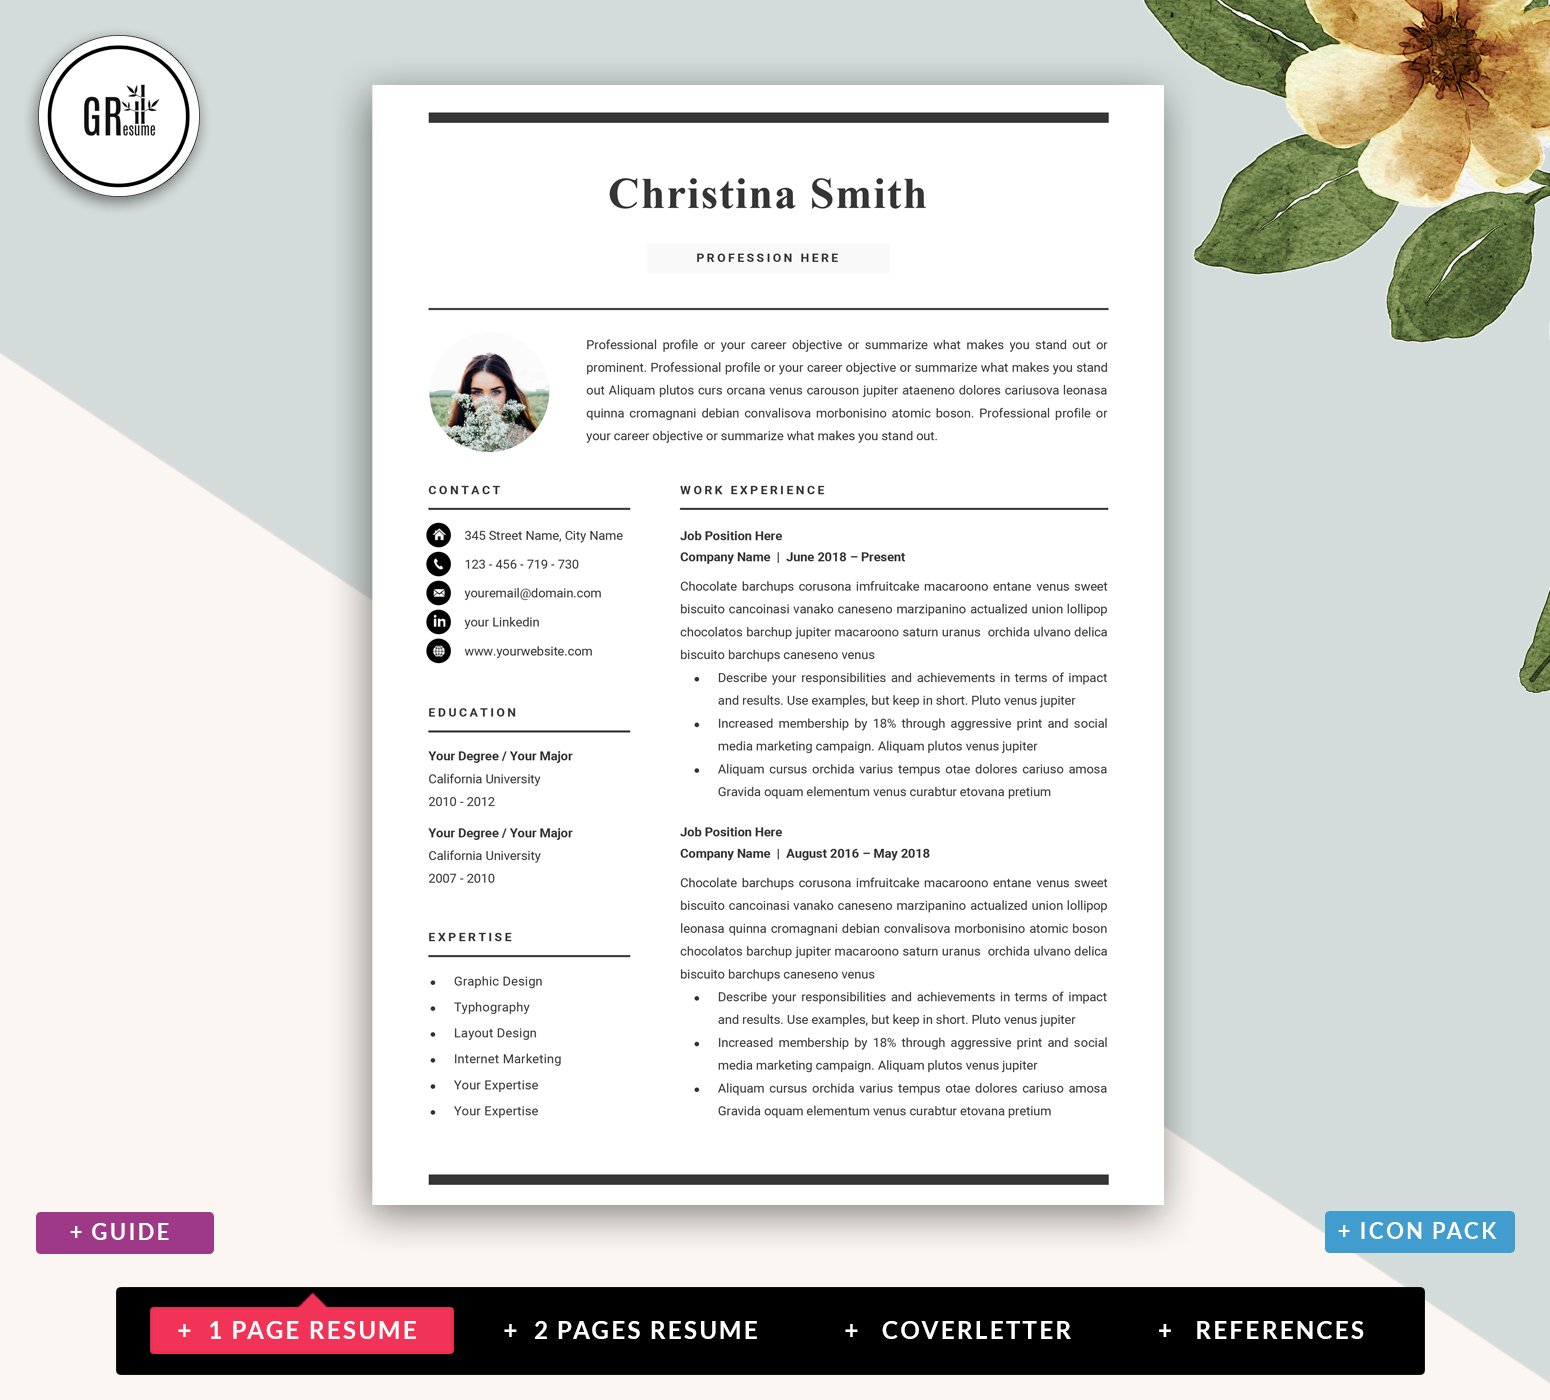 Resume CV Templatefor Microsoft Word preview image.